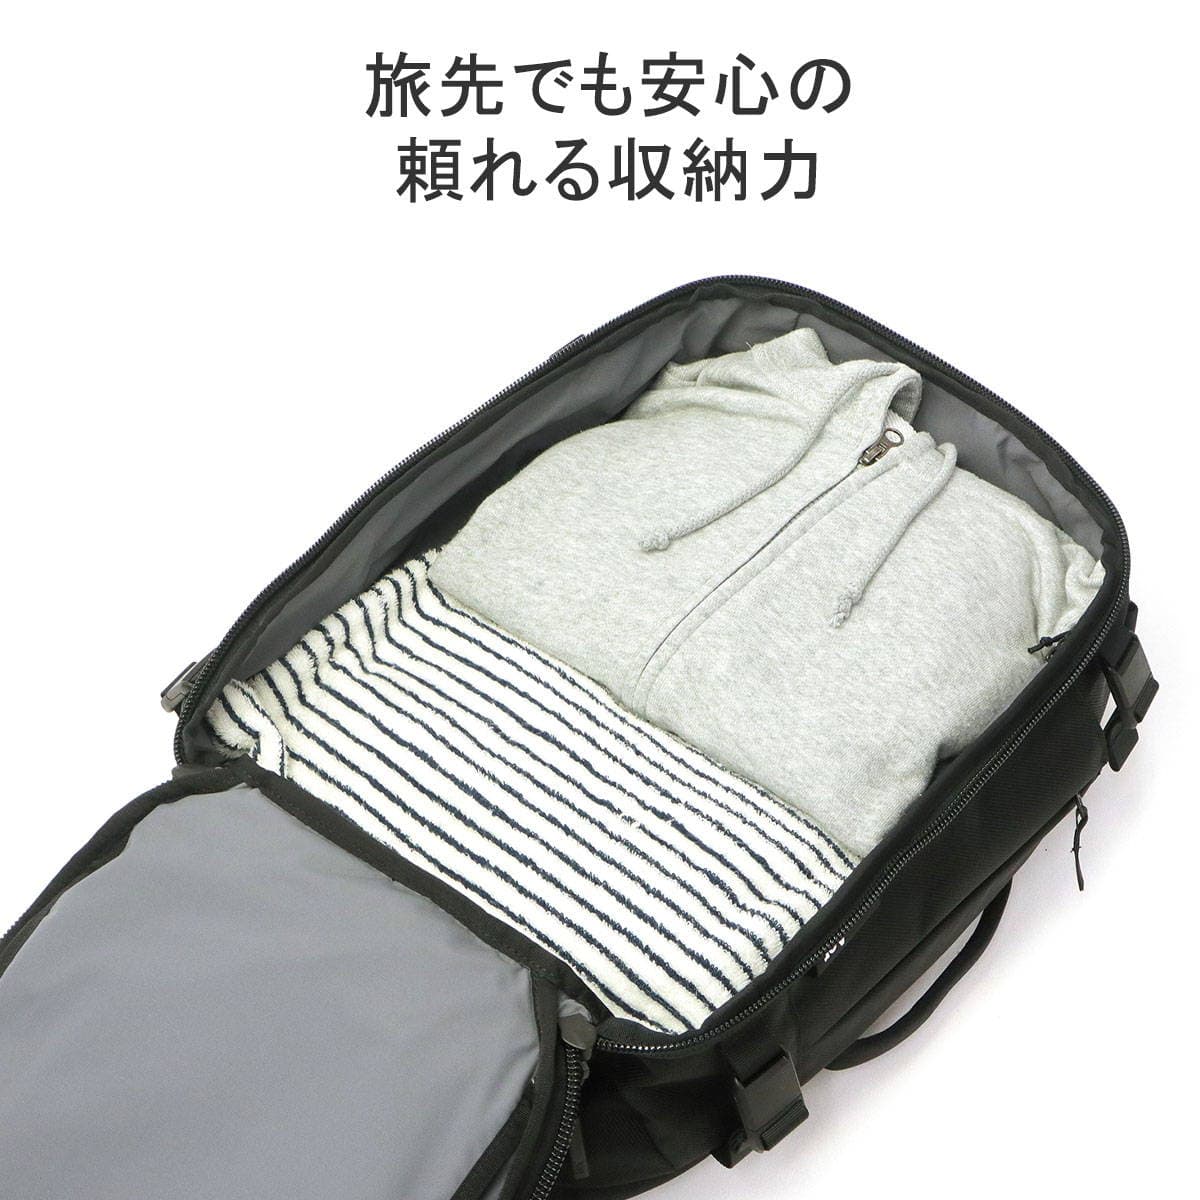 Aer エアー Travel Collection Travel Pack 3 Small バックパック 28L ...